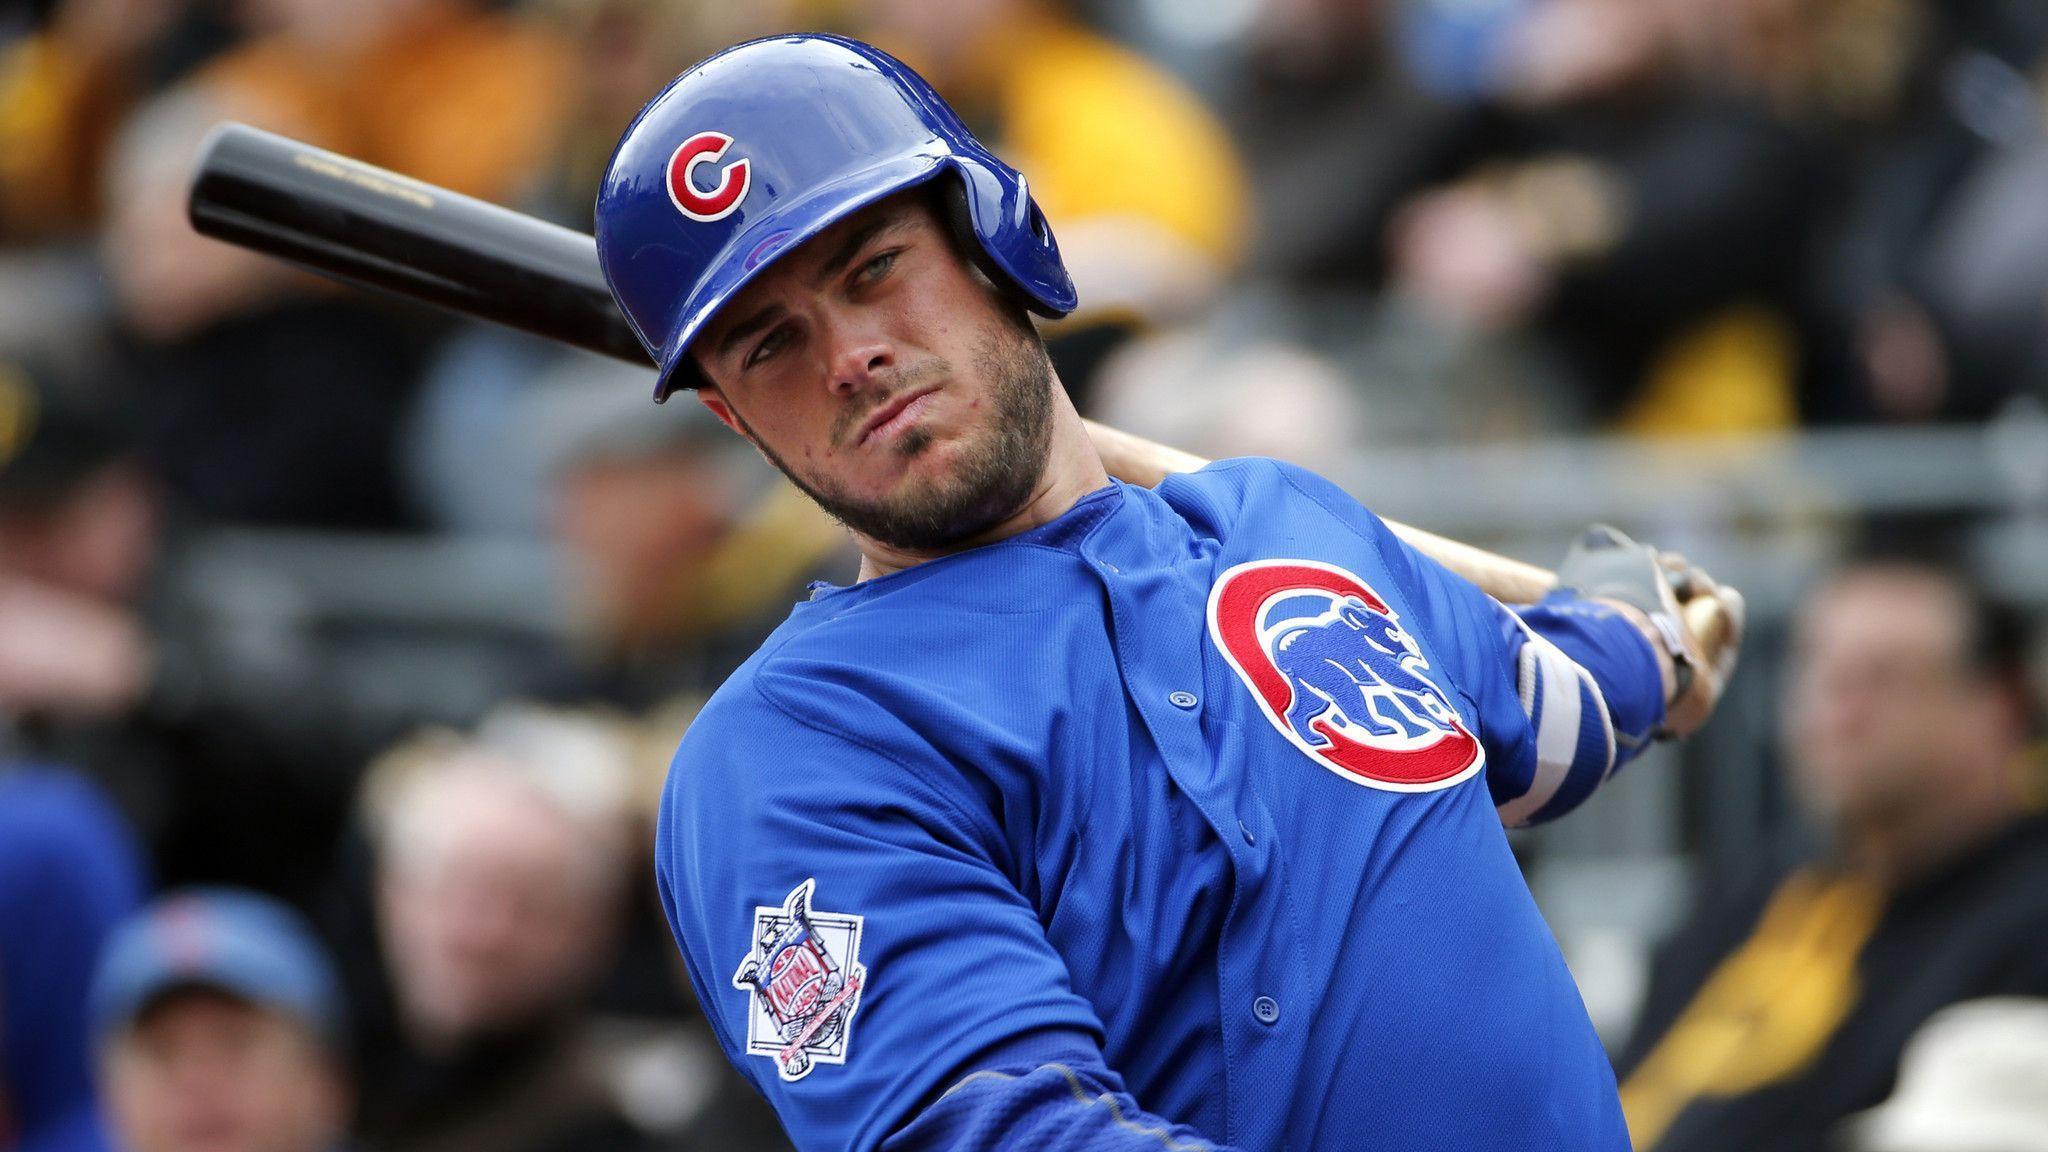 Chicago Cubs' Kris Bryant On All Star Ballot, 12 Days Into Career